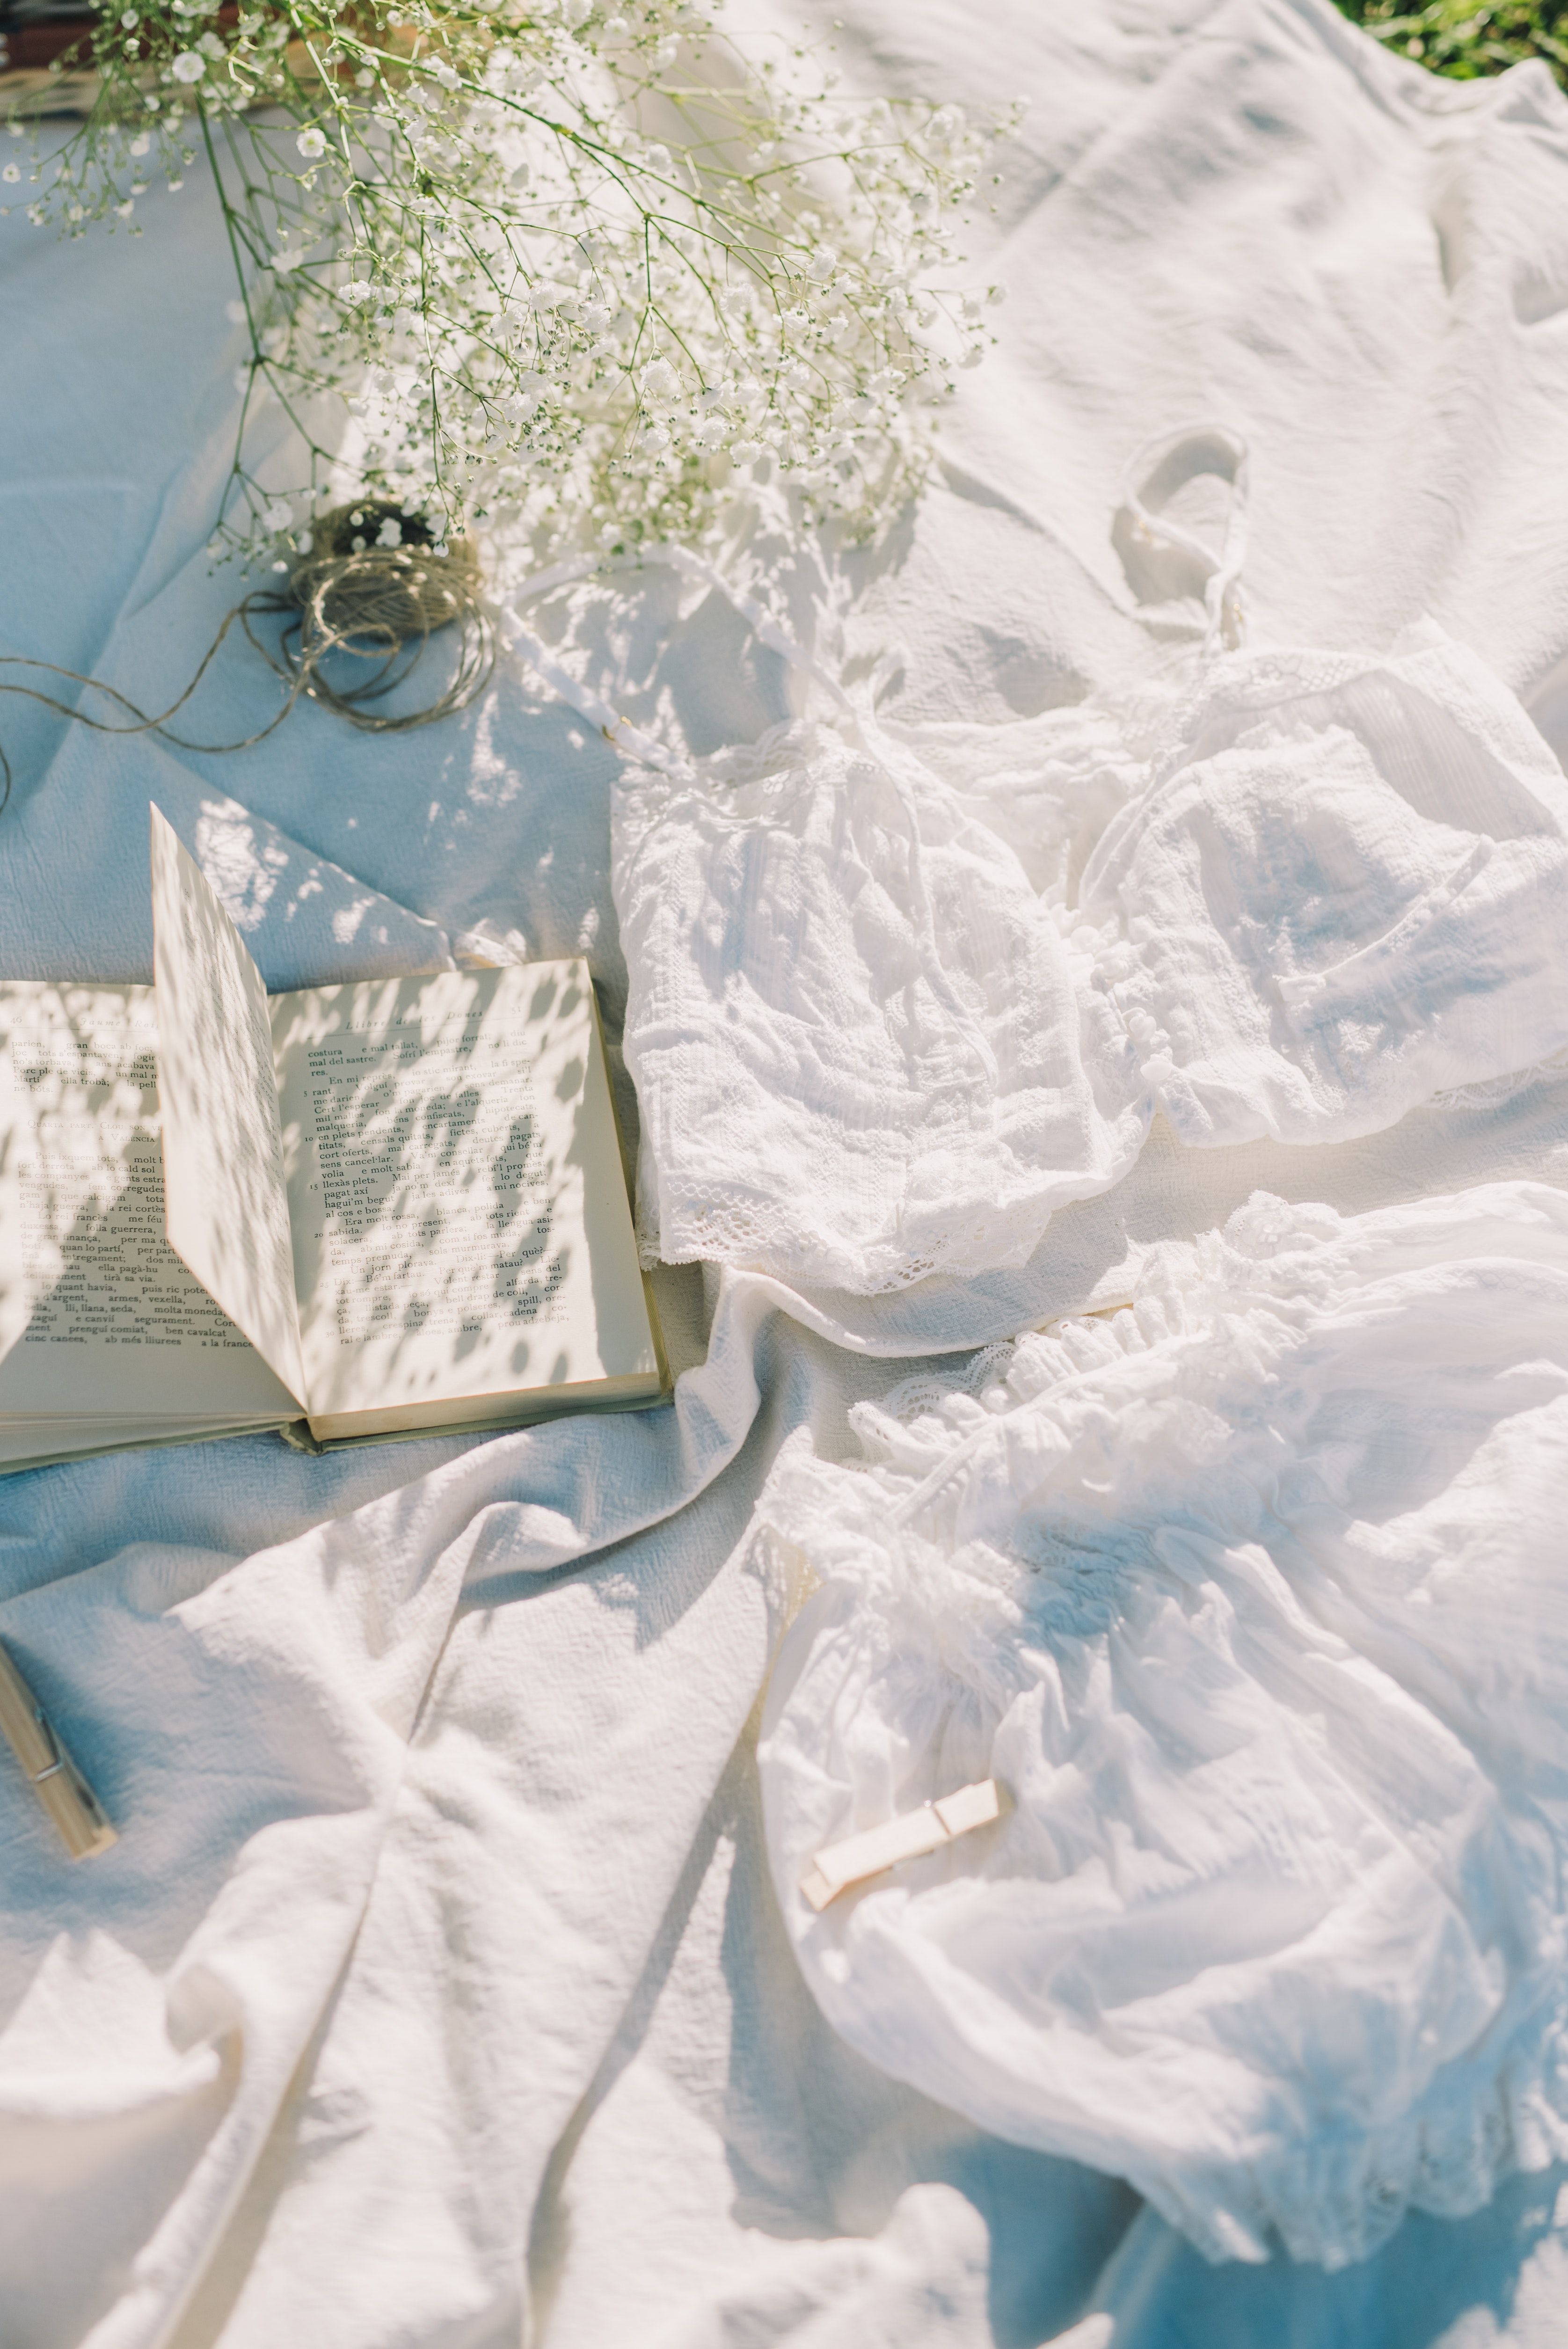 A white blanket with a book, flowers, and a dress on it. - Books, white, France, cute white